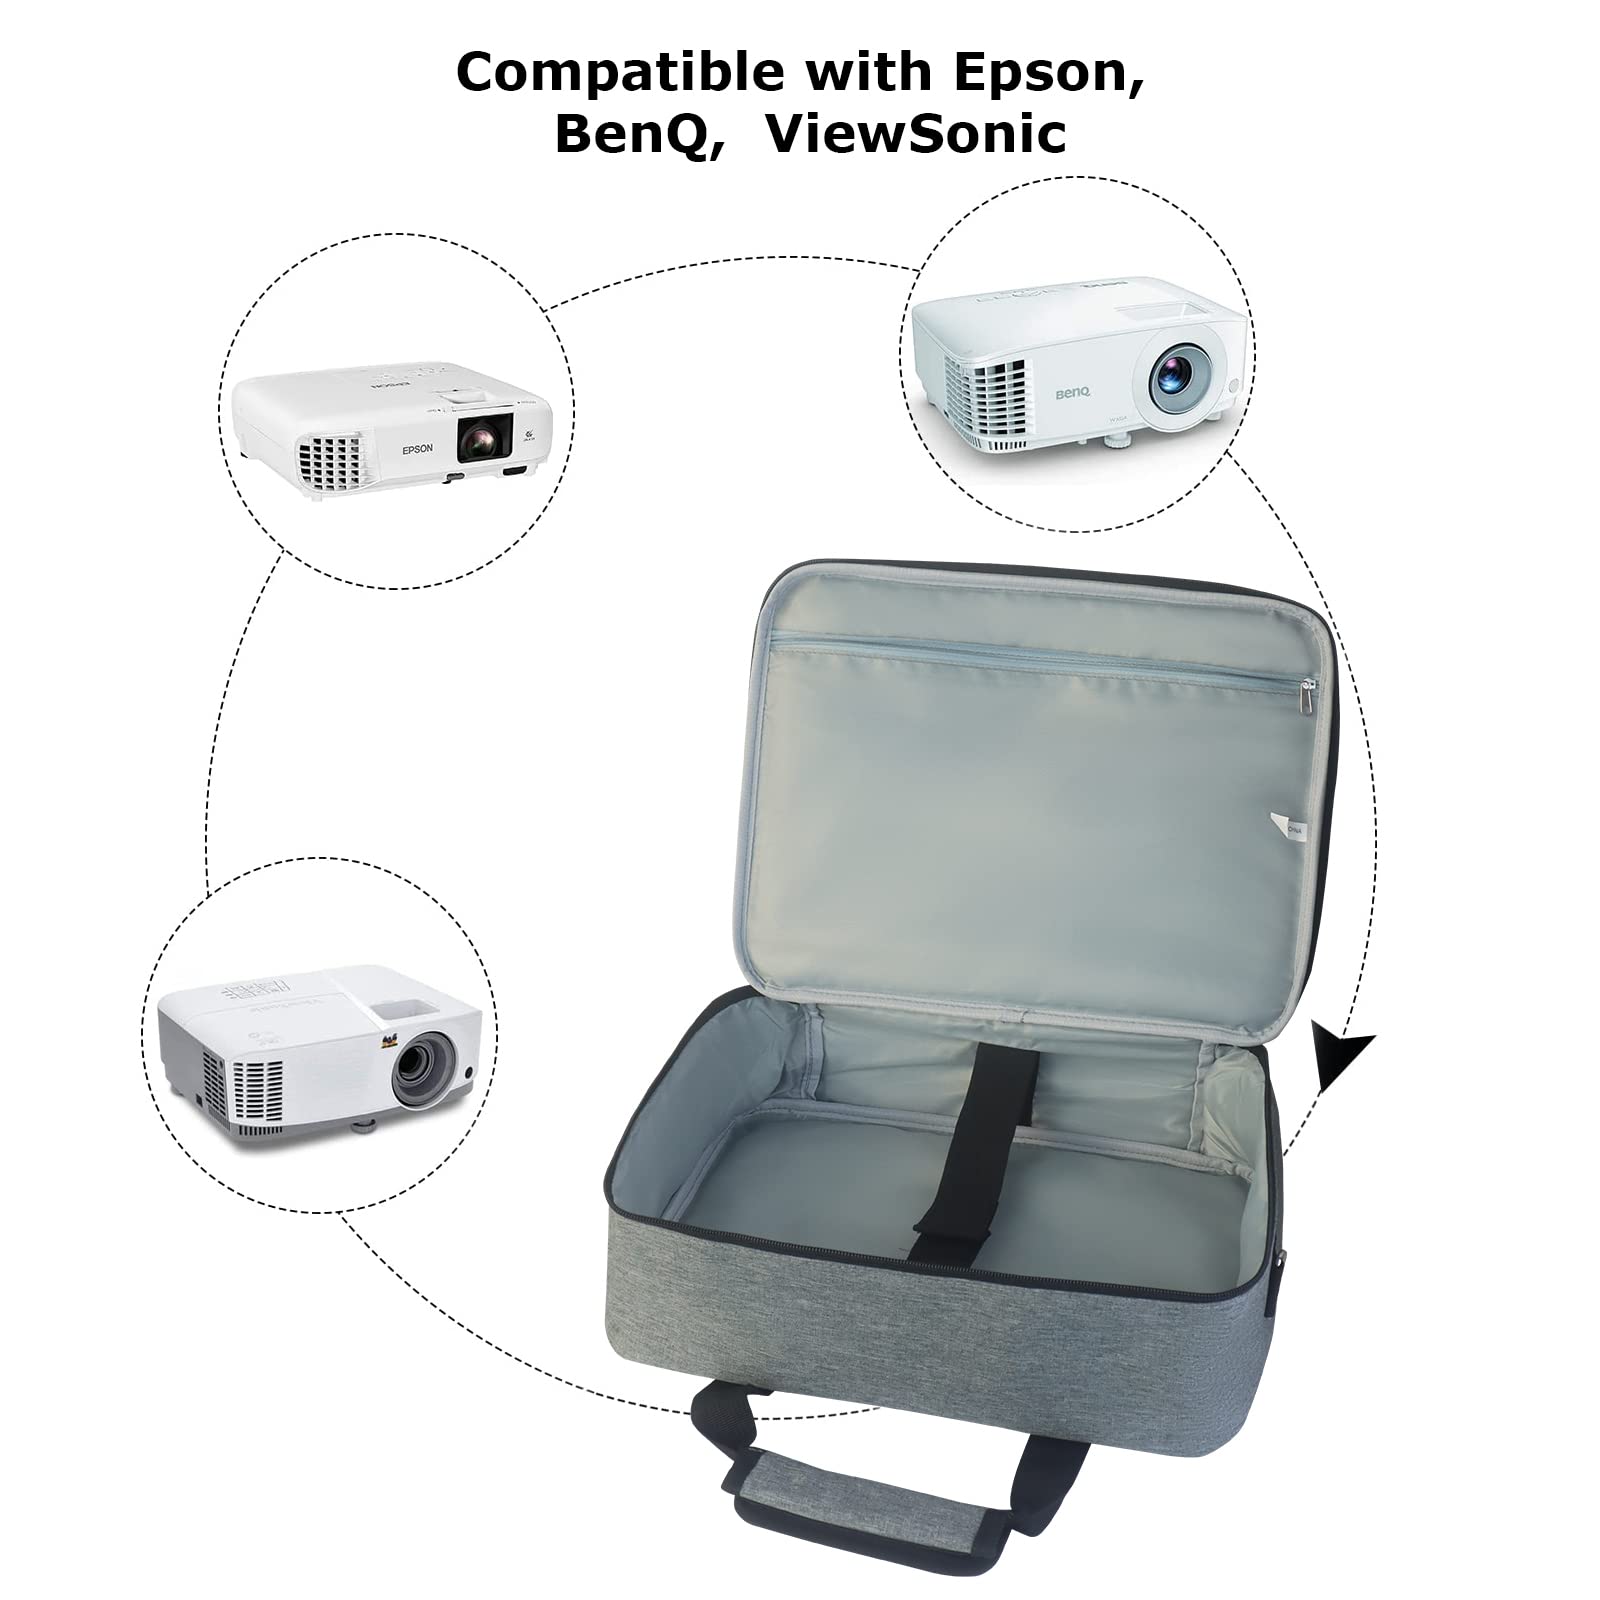 Doksmeria Projector Carrying Case, Projector Bag with Accessories Storage Pockets & Adjustable Shoulder Straps, Portable Carrying Bag Compatible with Epson BenQ ViewSonic and Most Mini Projectors